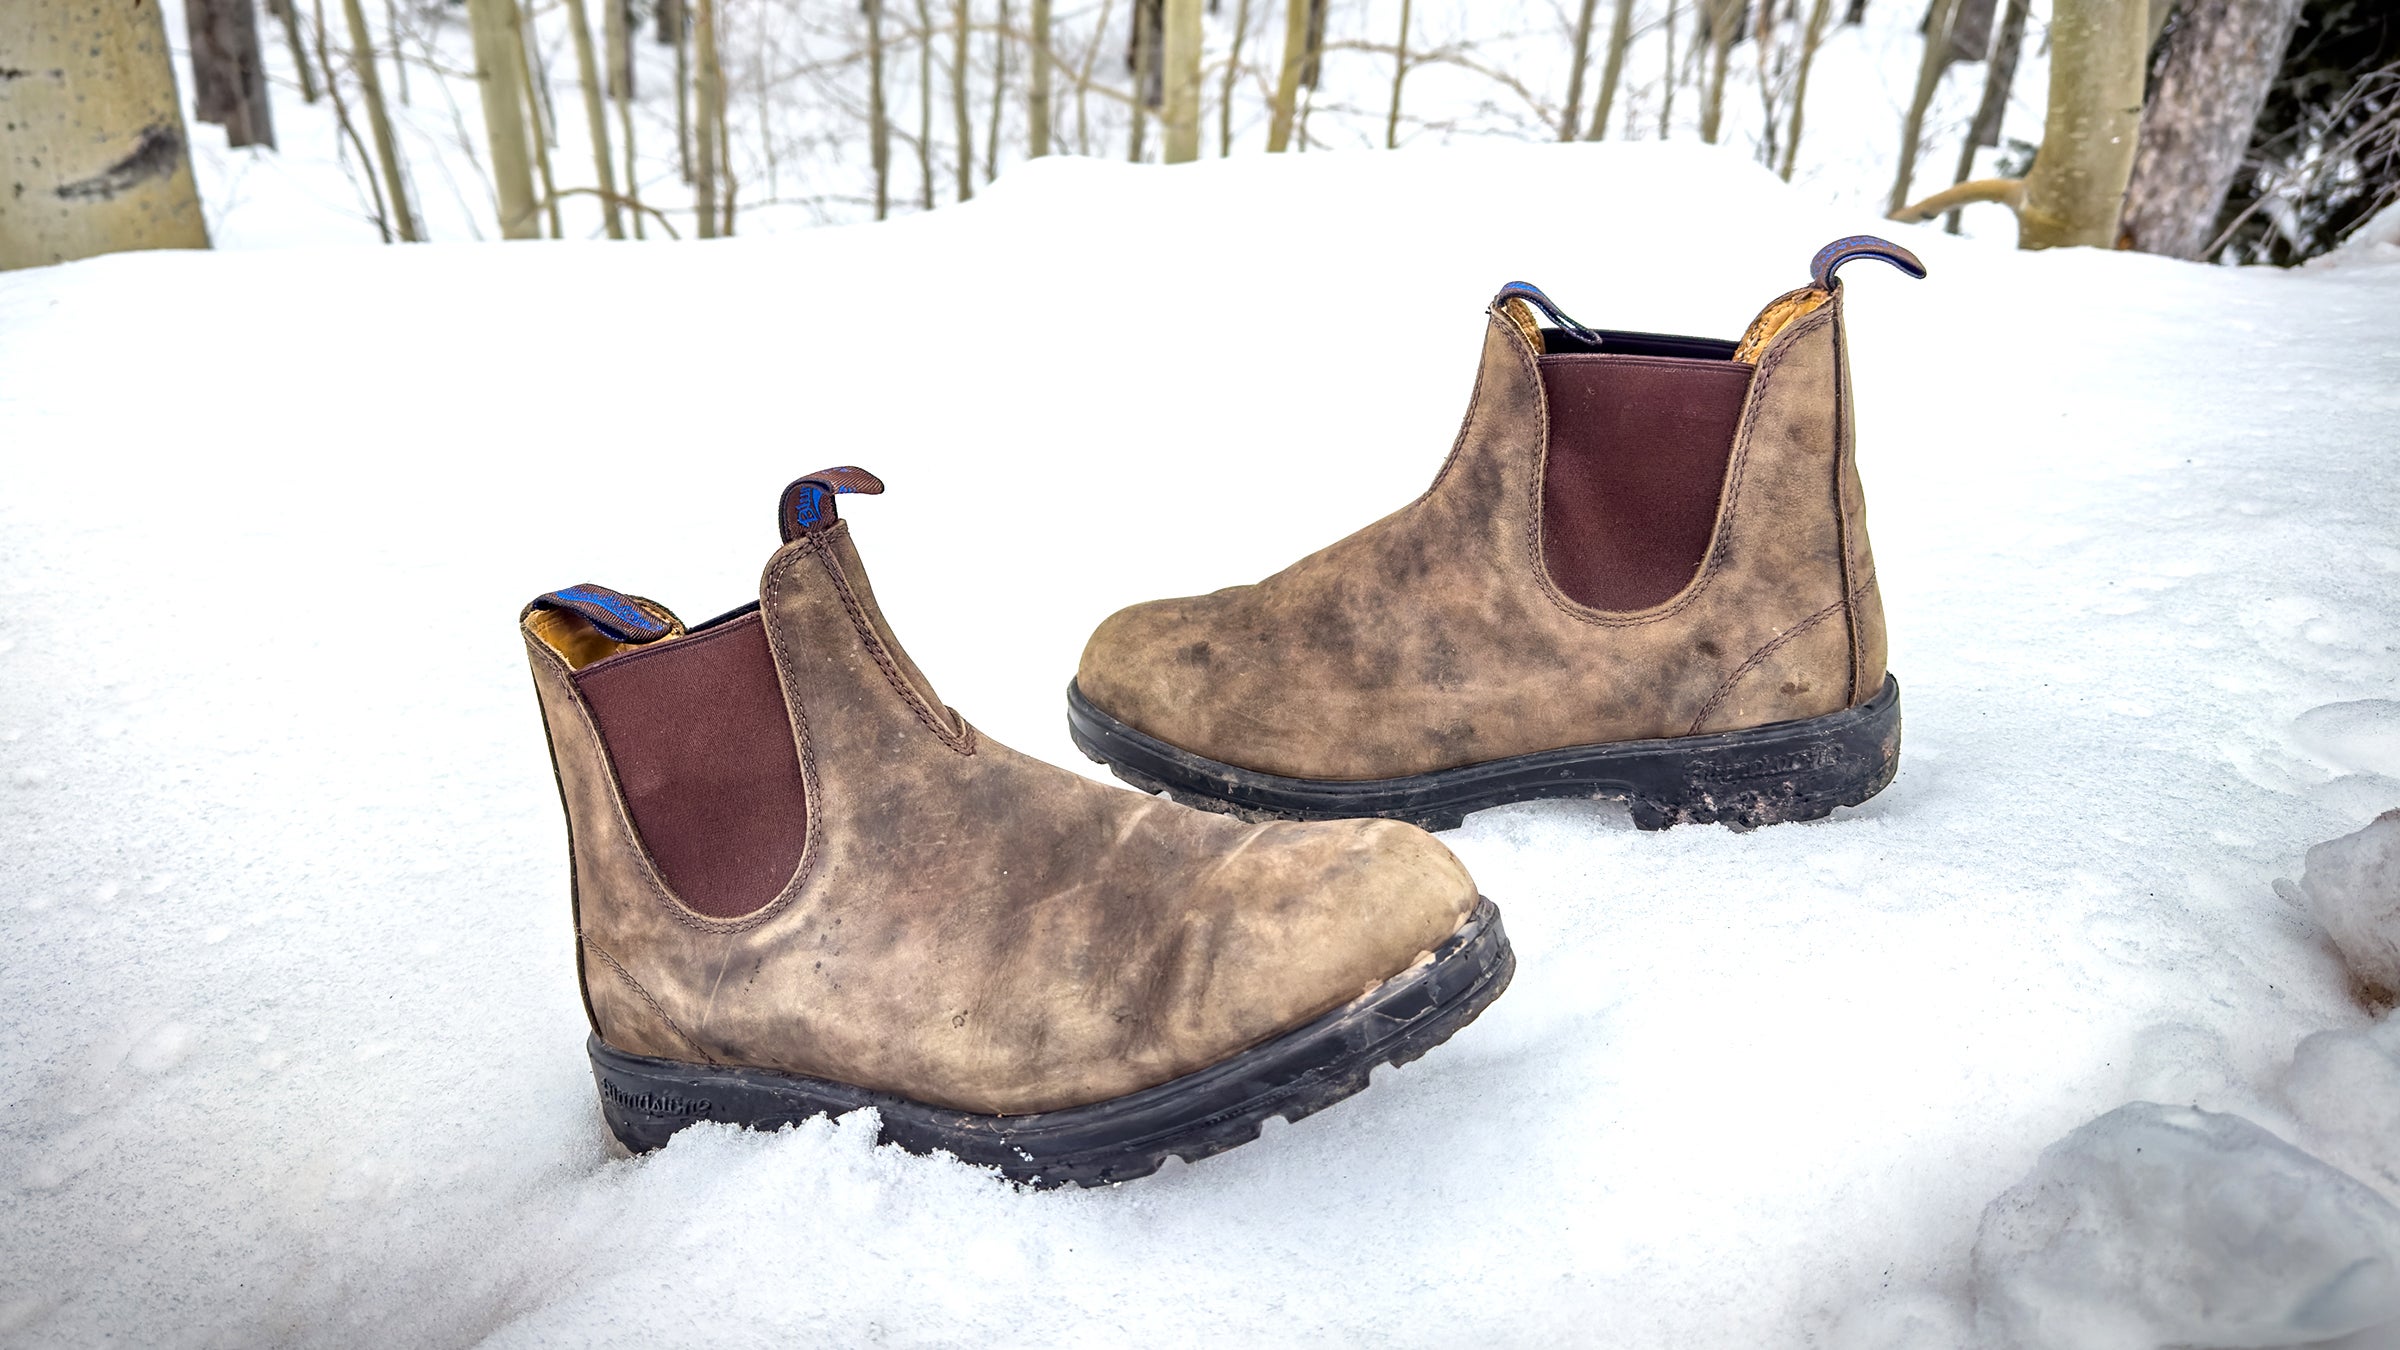 Are Blundstones Warm Enough for Winter?